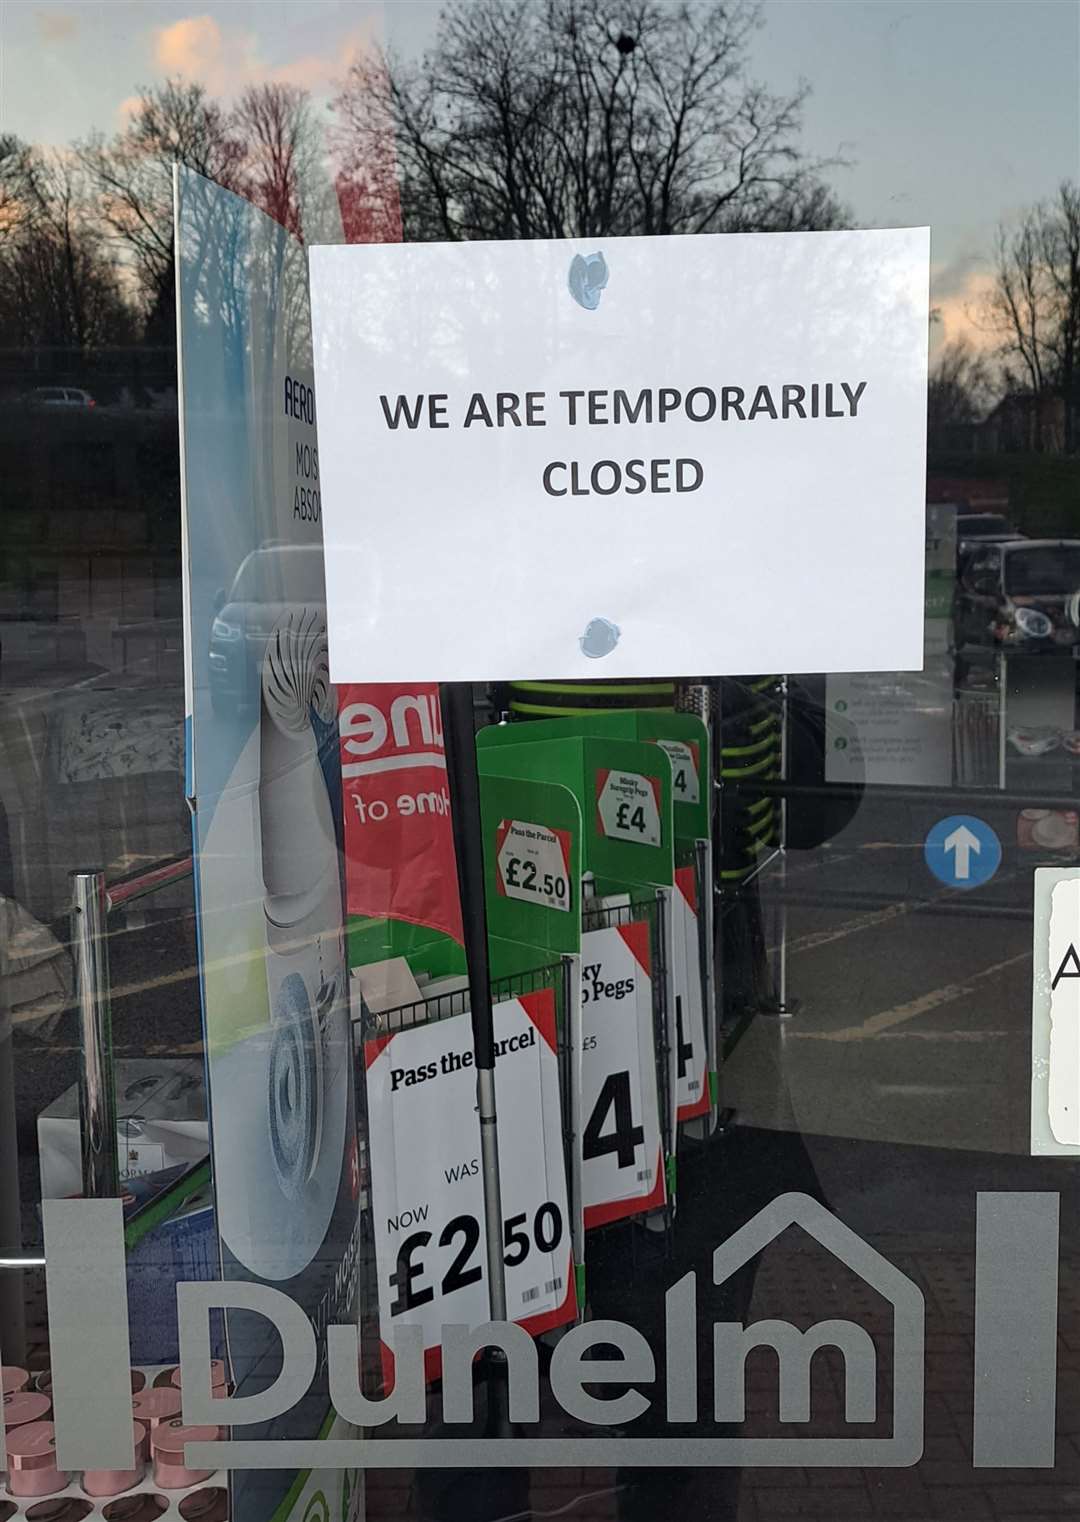 Customers were not given any explanation